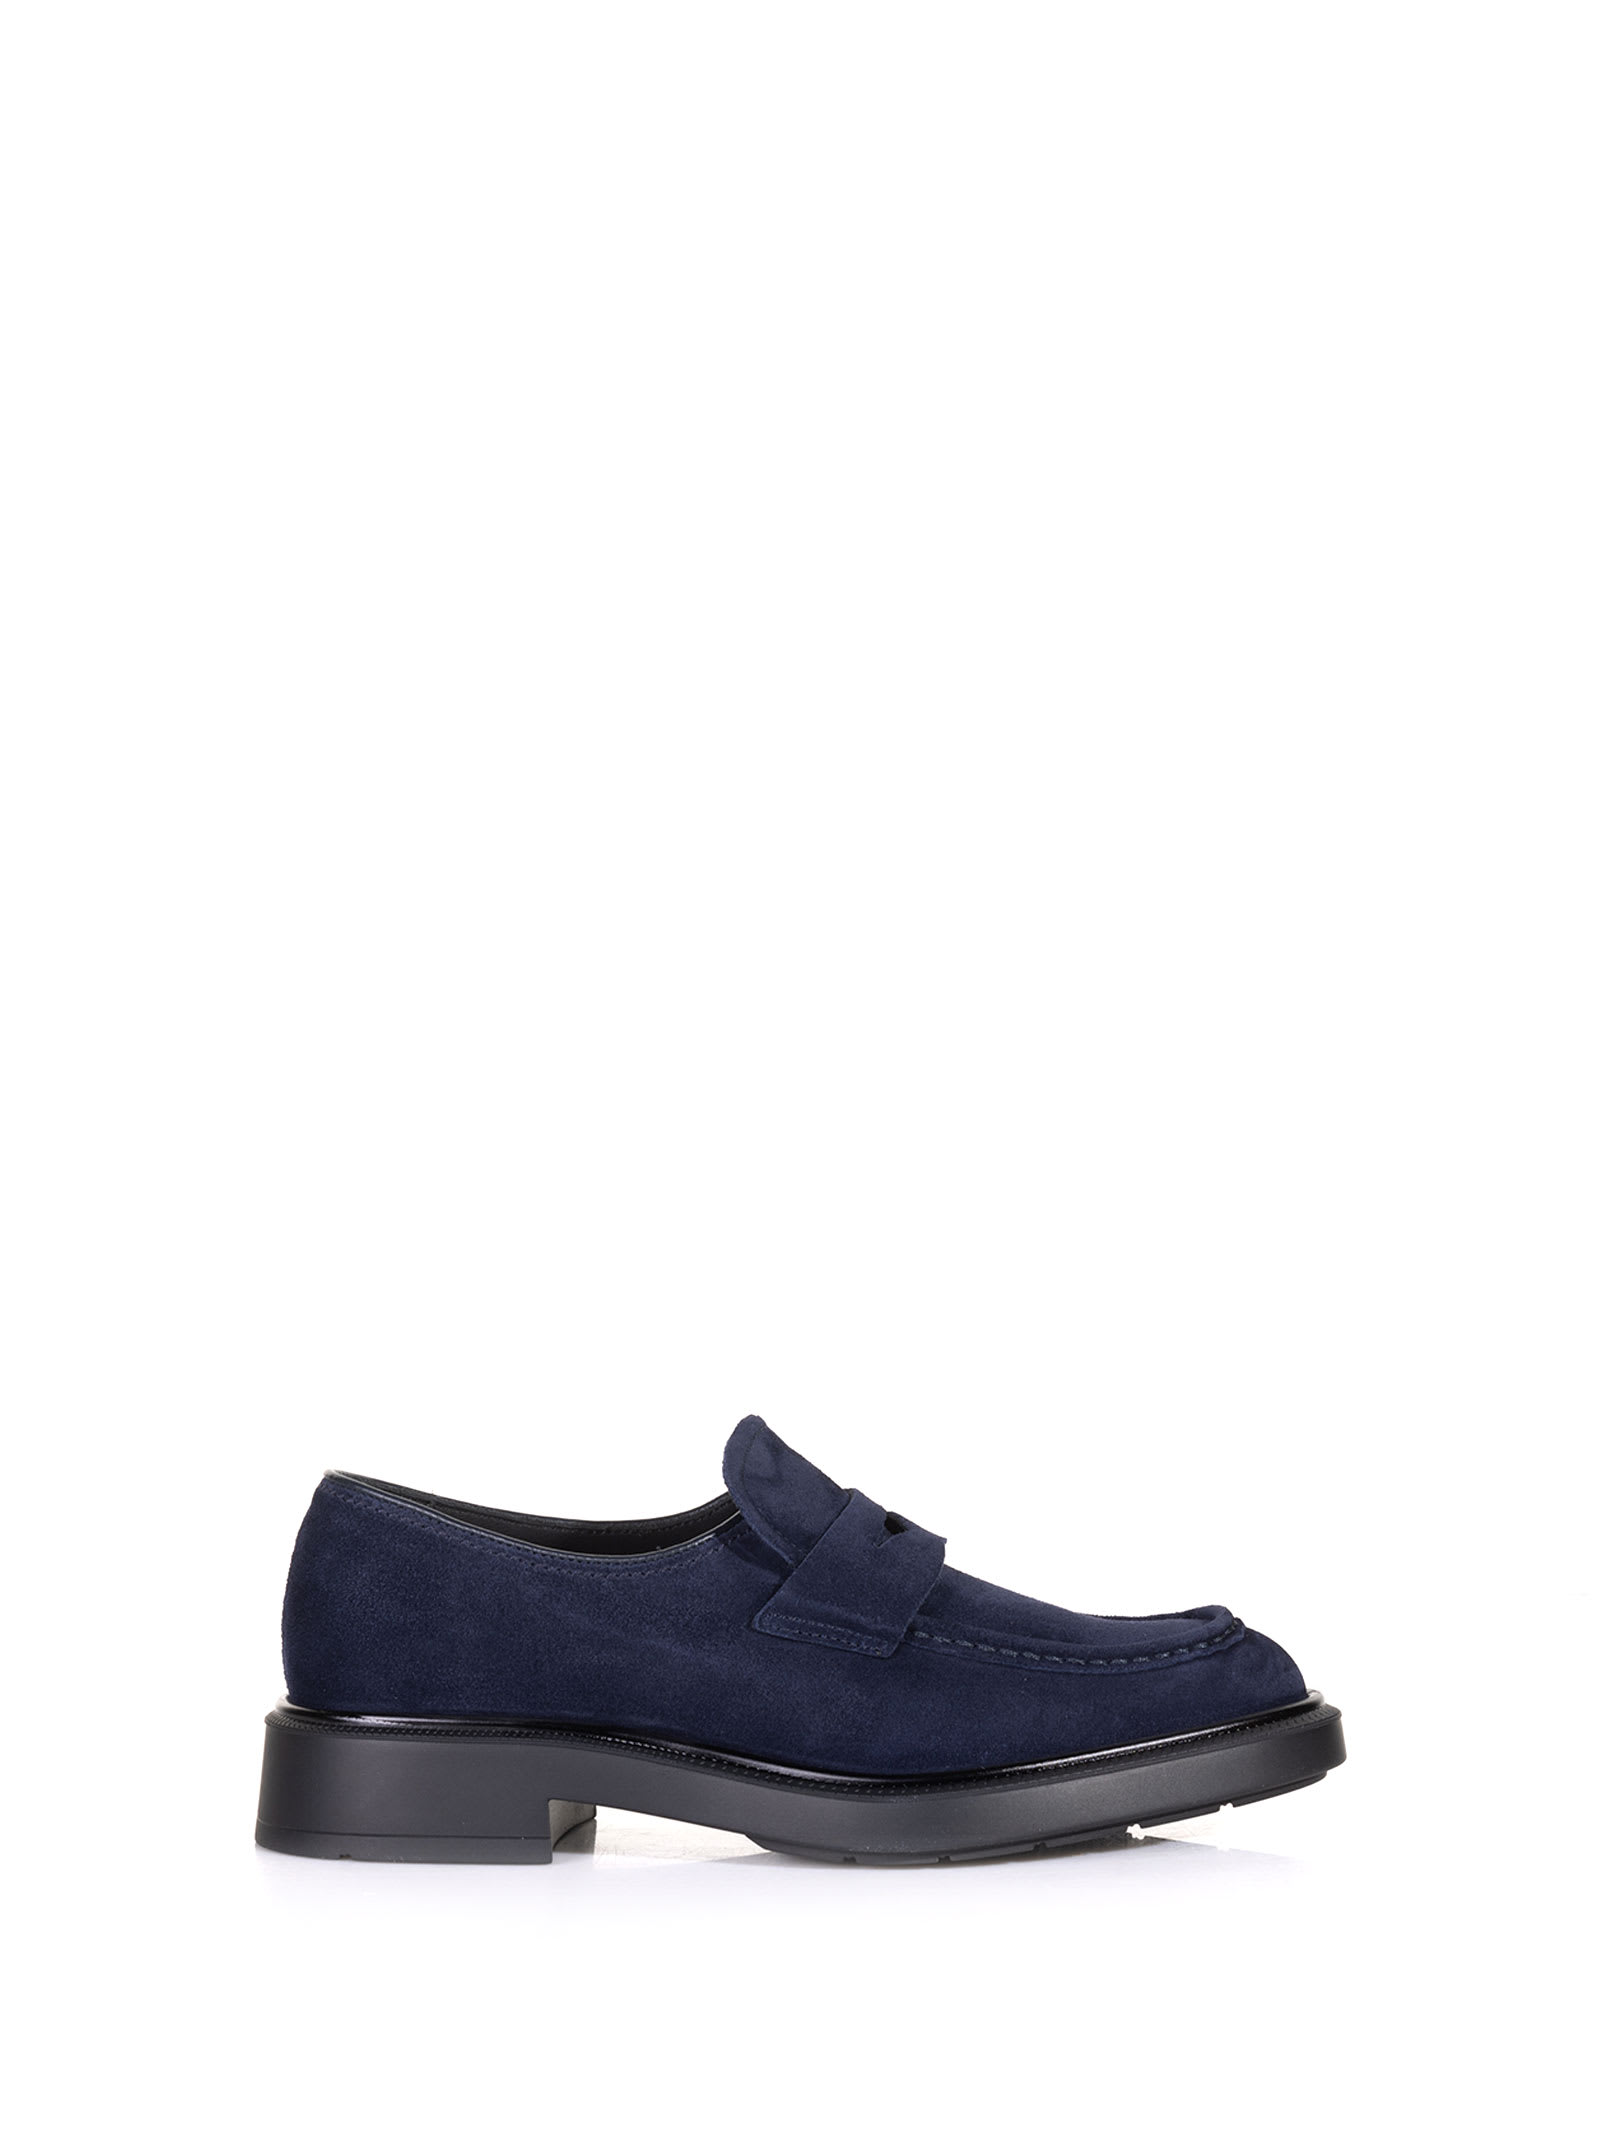 Fratelli Rossetti One Blue Suede Loafer